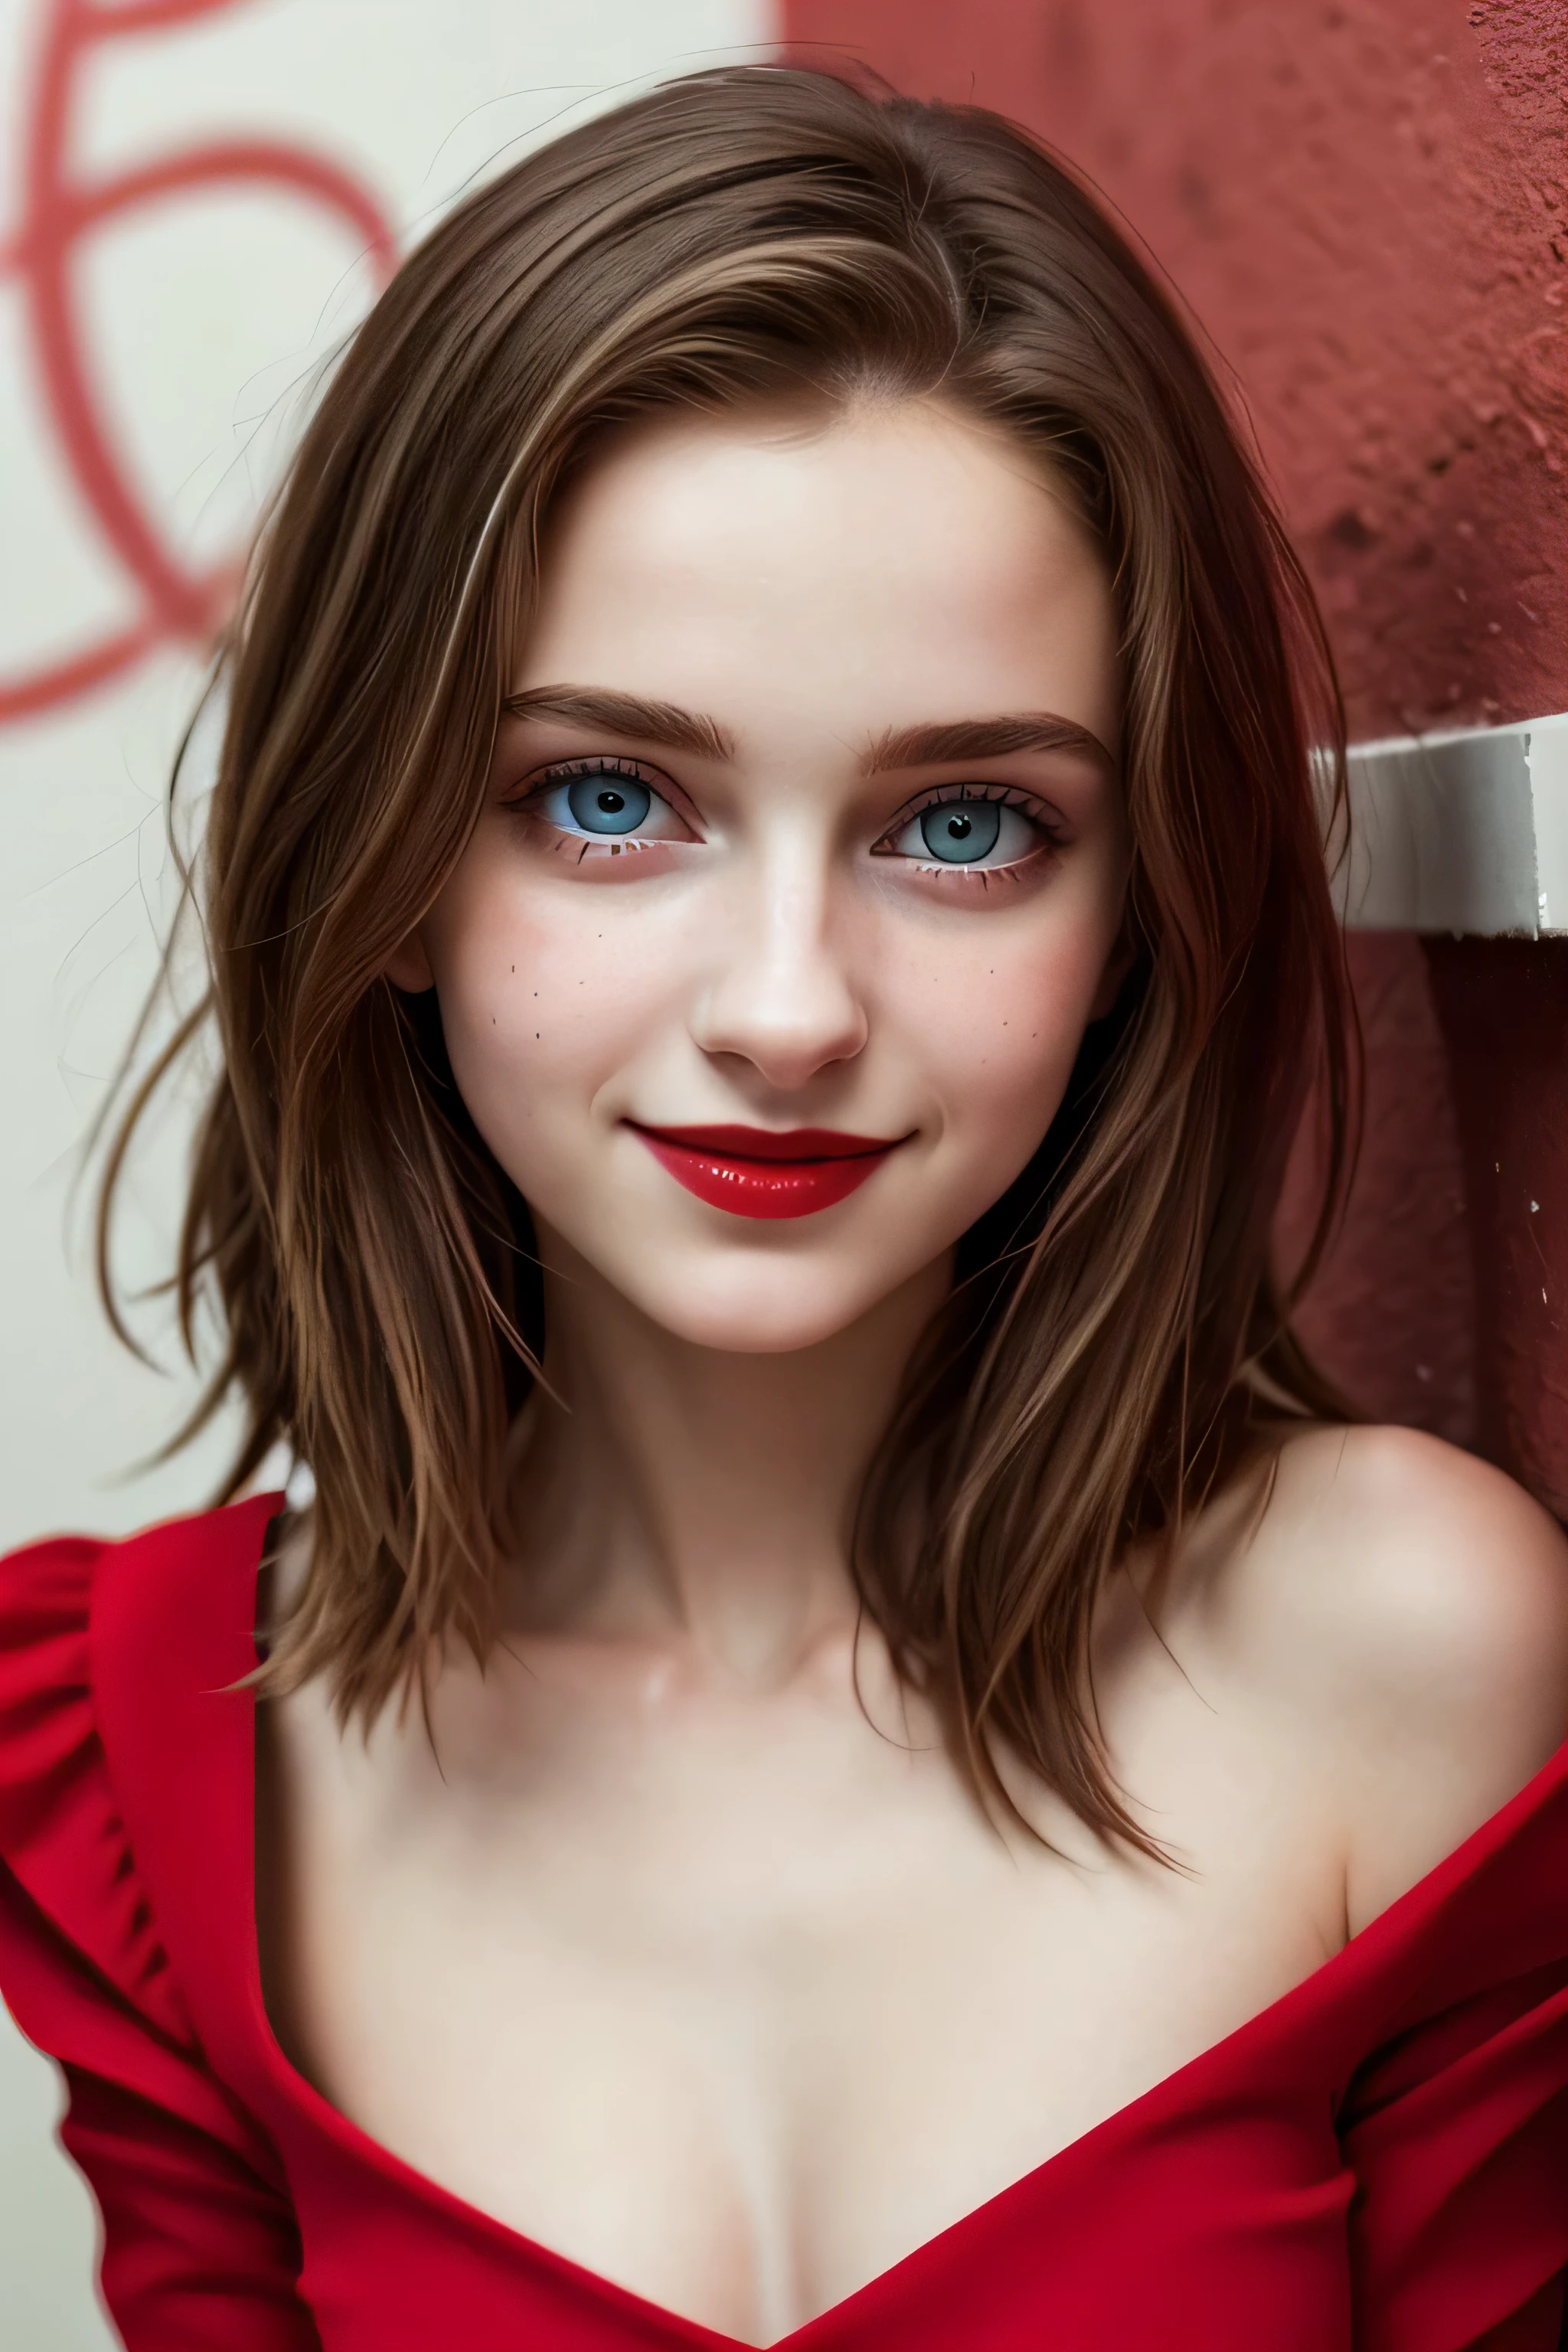 (masterpiece, high quality, Fisheye:1.2)、cute eyes、Beautiful woman、smile: The corners of the mouth are slightly raised.、(close-up portrait:1.1), alone, model photoshoot, (red theme:1.1), stylish girl, red hair, Silvery eyes, red lipstick, red eye shadow, red面, (freckles:0.7), (European 14 years old:1.3), sexy, Pure Innocence, (軽いsmile:0.8), prostitute atmosphere, in love, simple red dress, cleavage, Detailed natural skin texture, captivating gaze, detailed lighting, (red:1.1) wall background, shallow depth of field, romantic atmosphere, Dreamy pastel palette, quirky details, captured on film, NSFW, (intricate details:0.5)